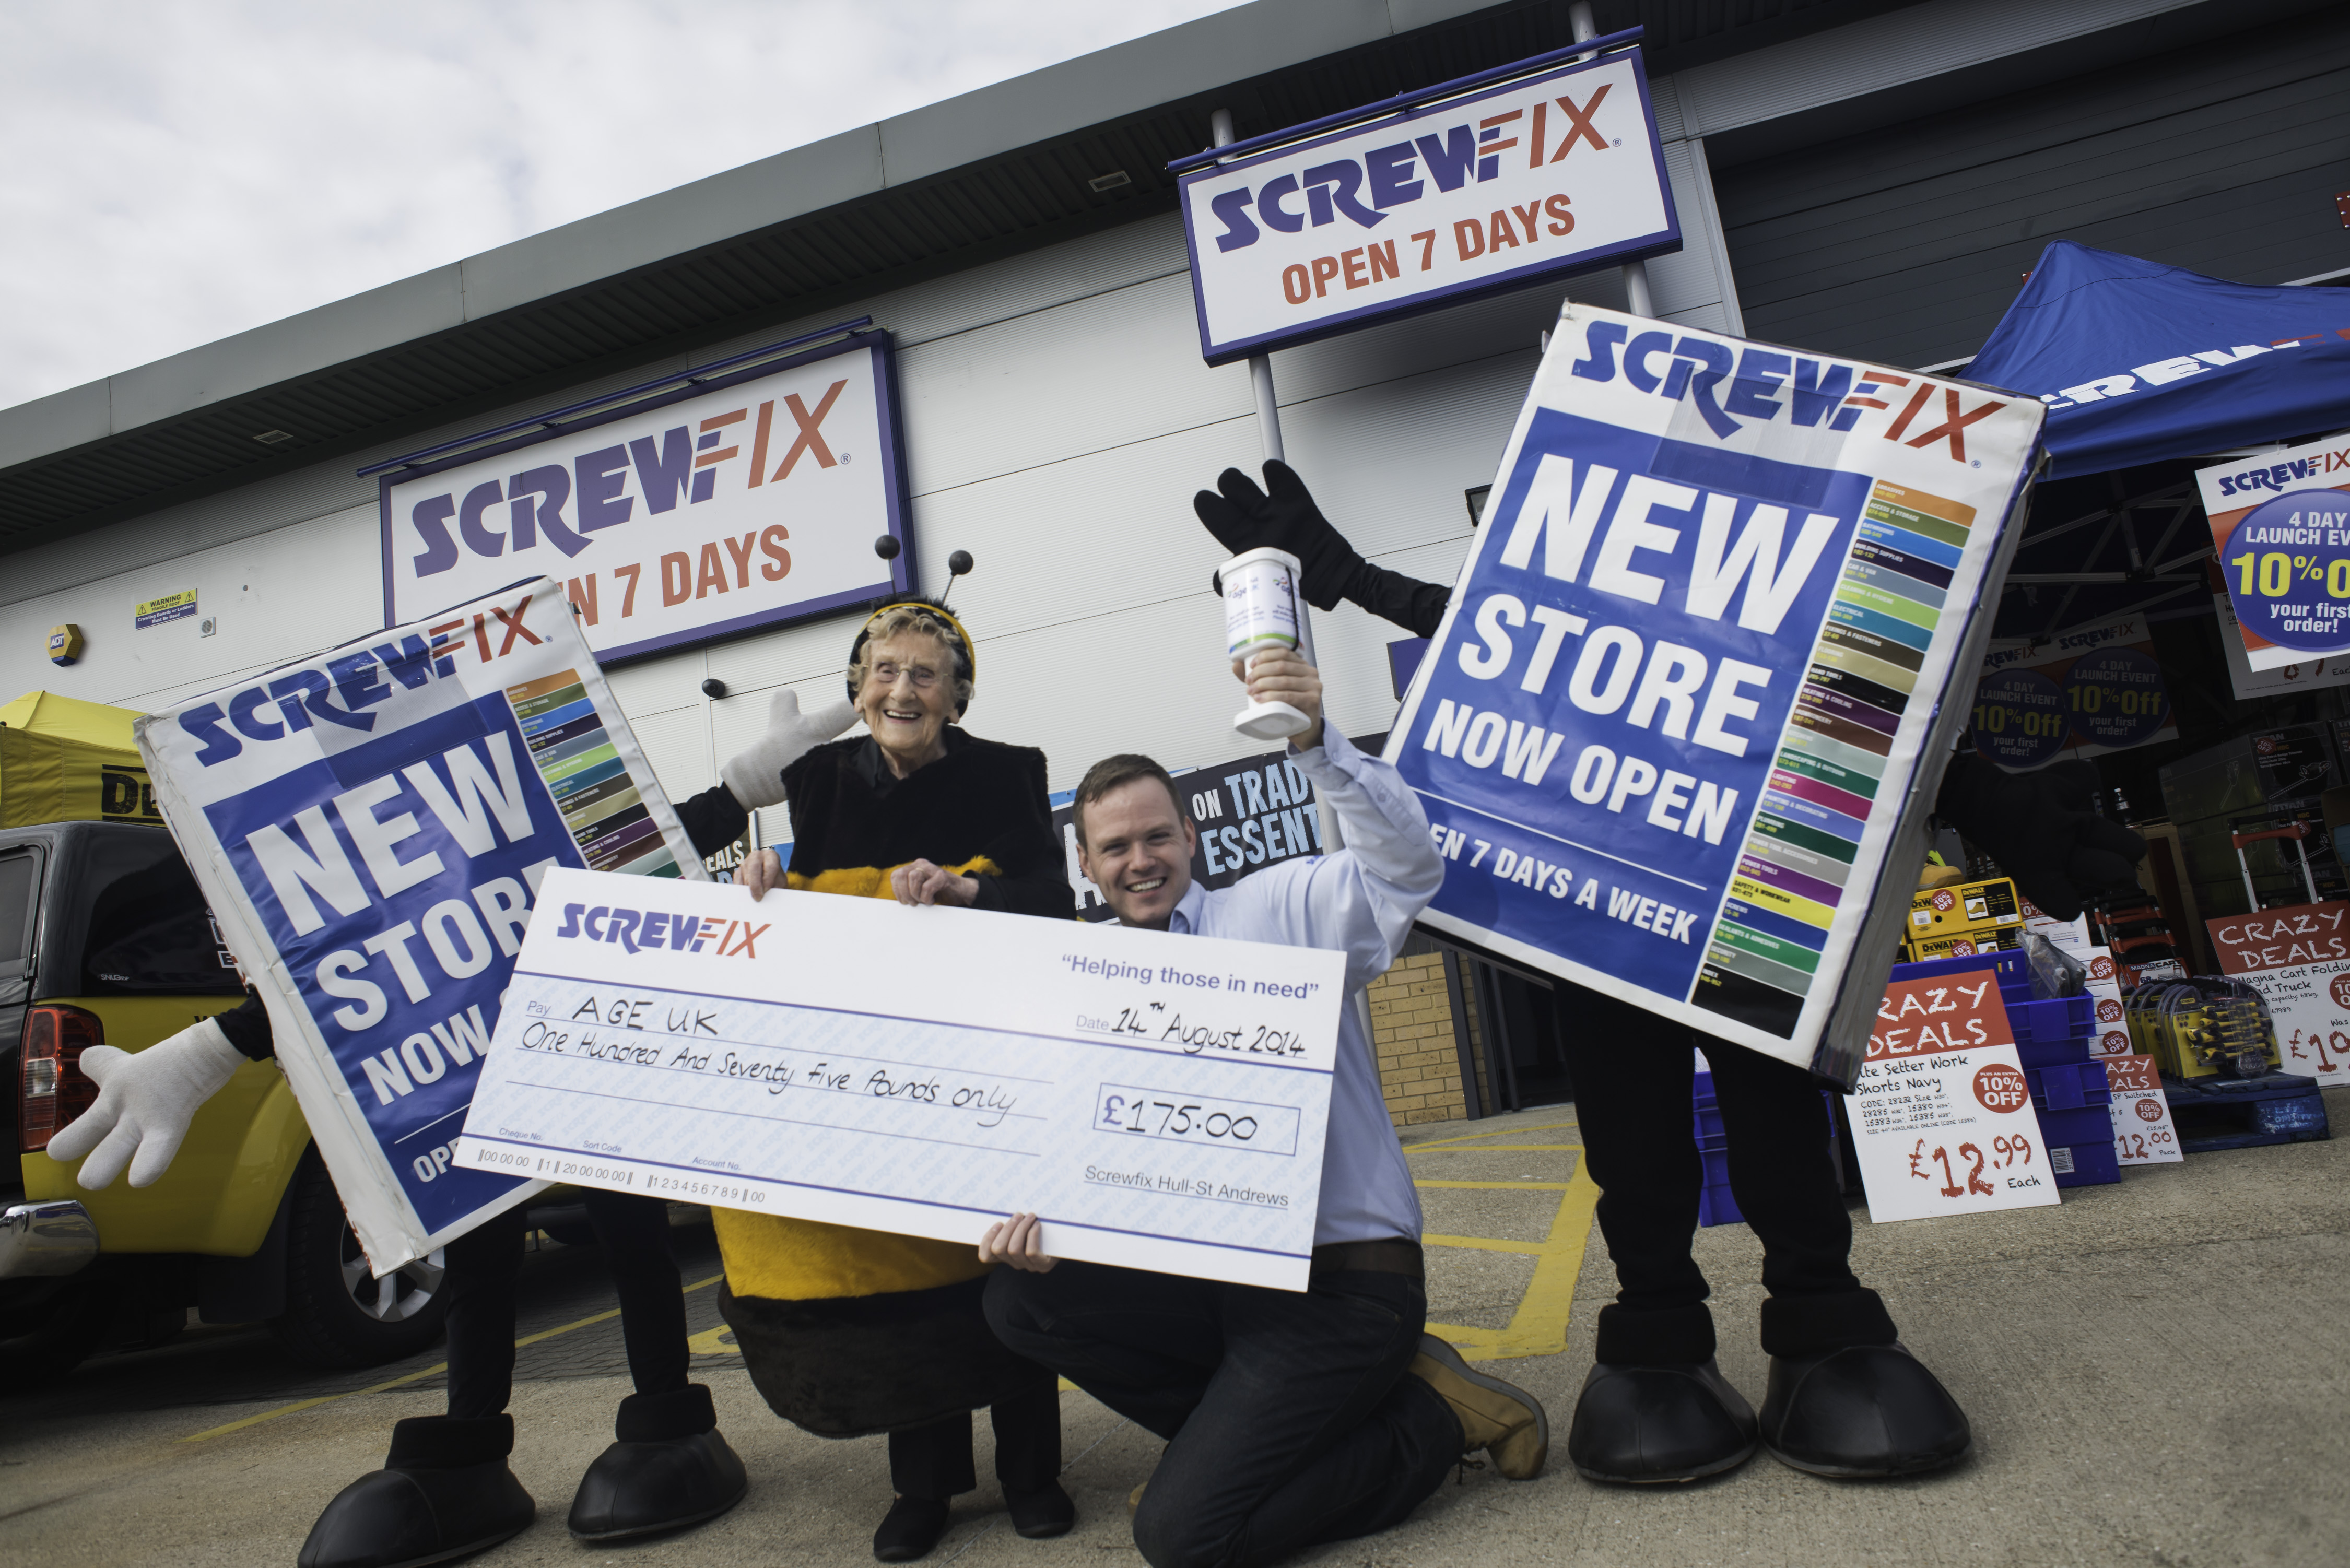 Hull’s second Screwfix store is declared a runaway success